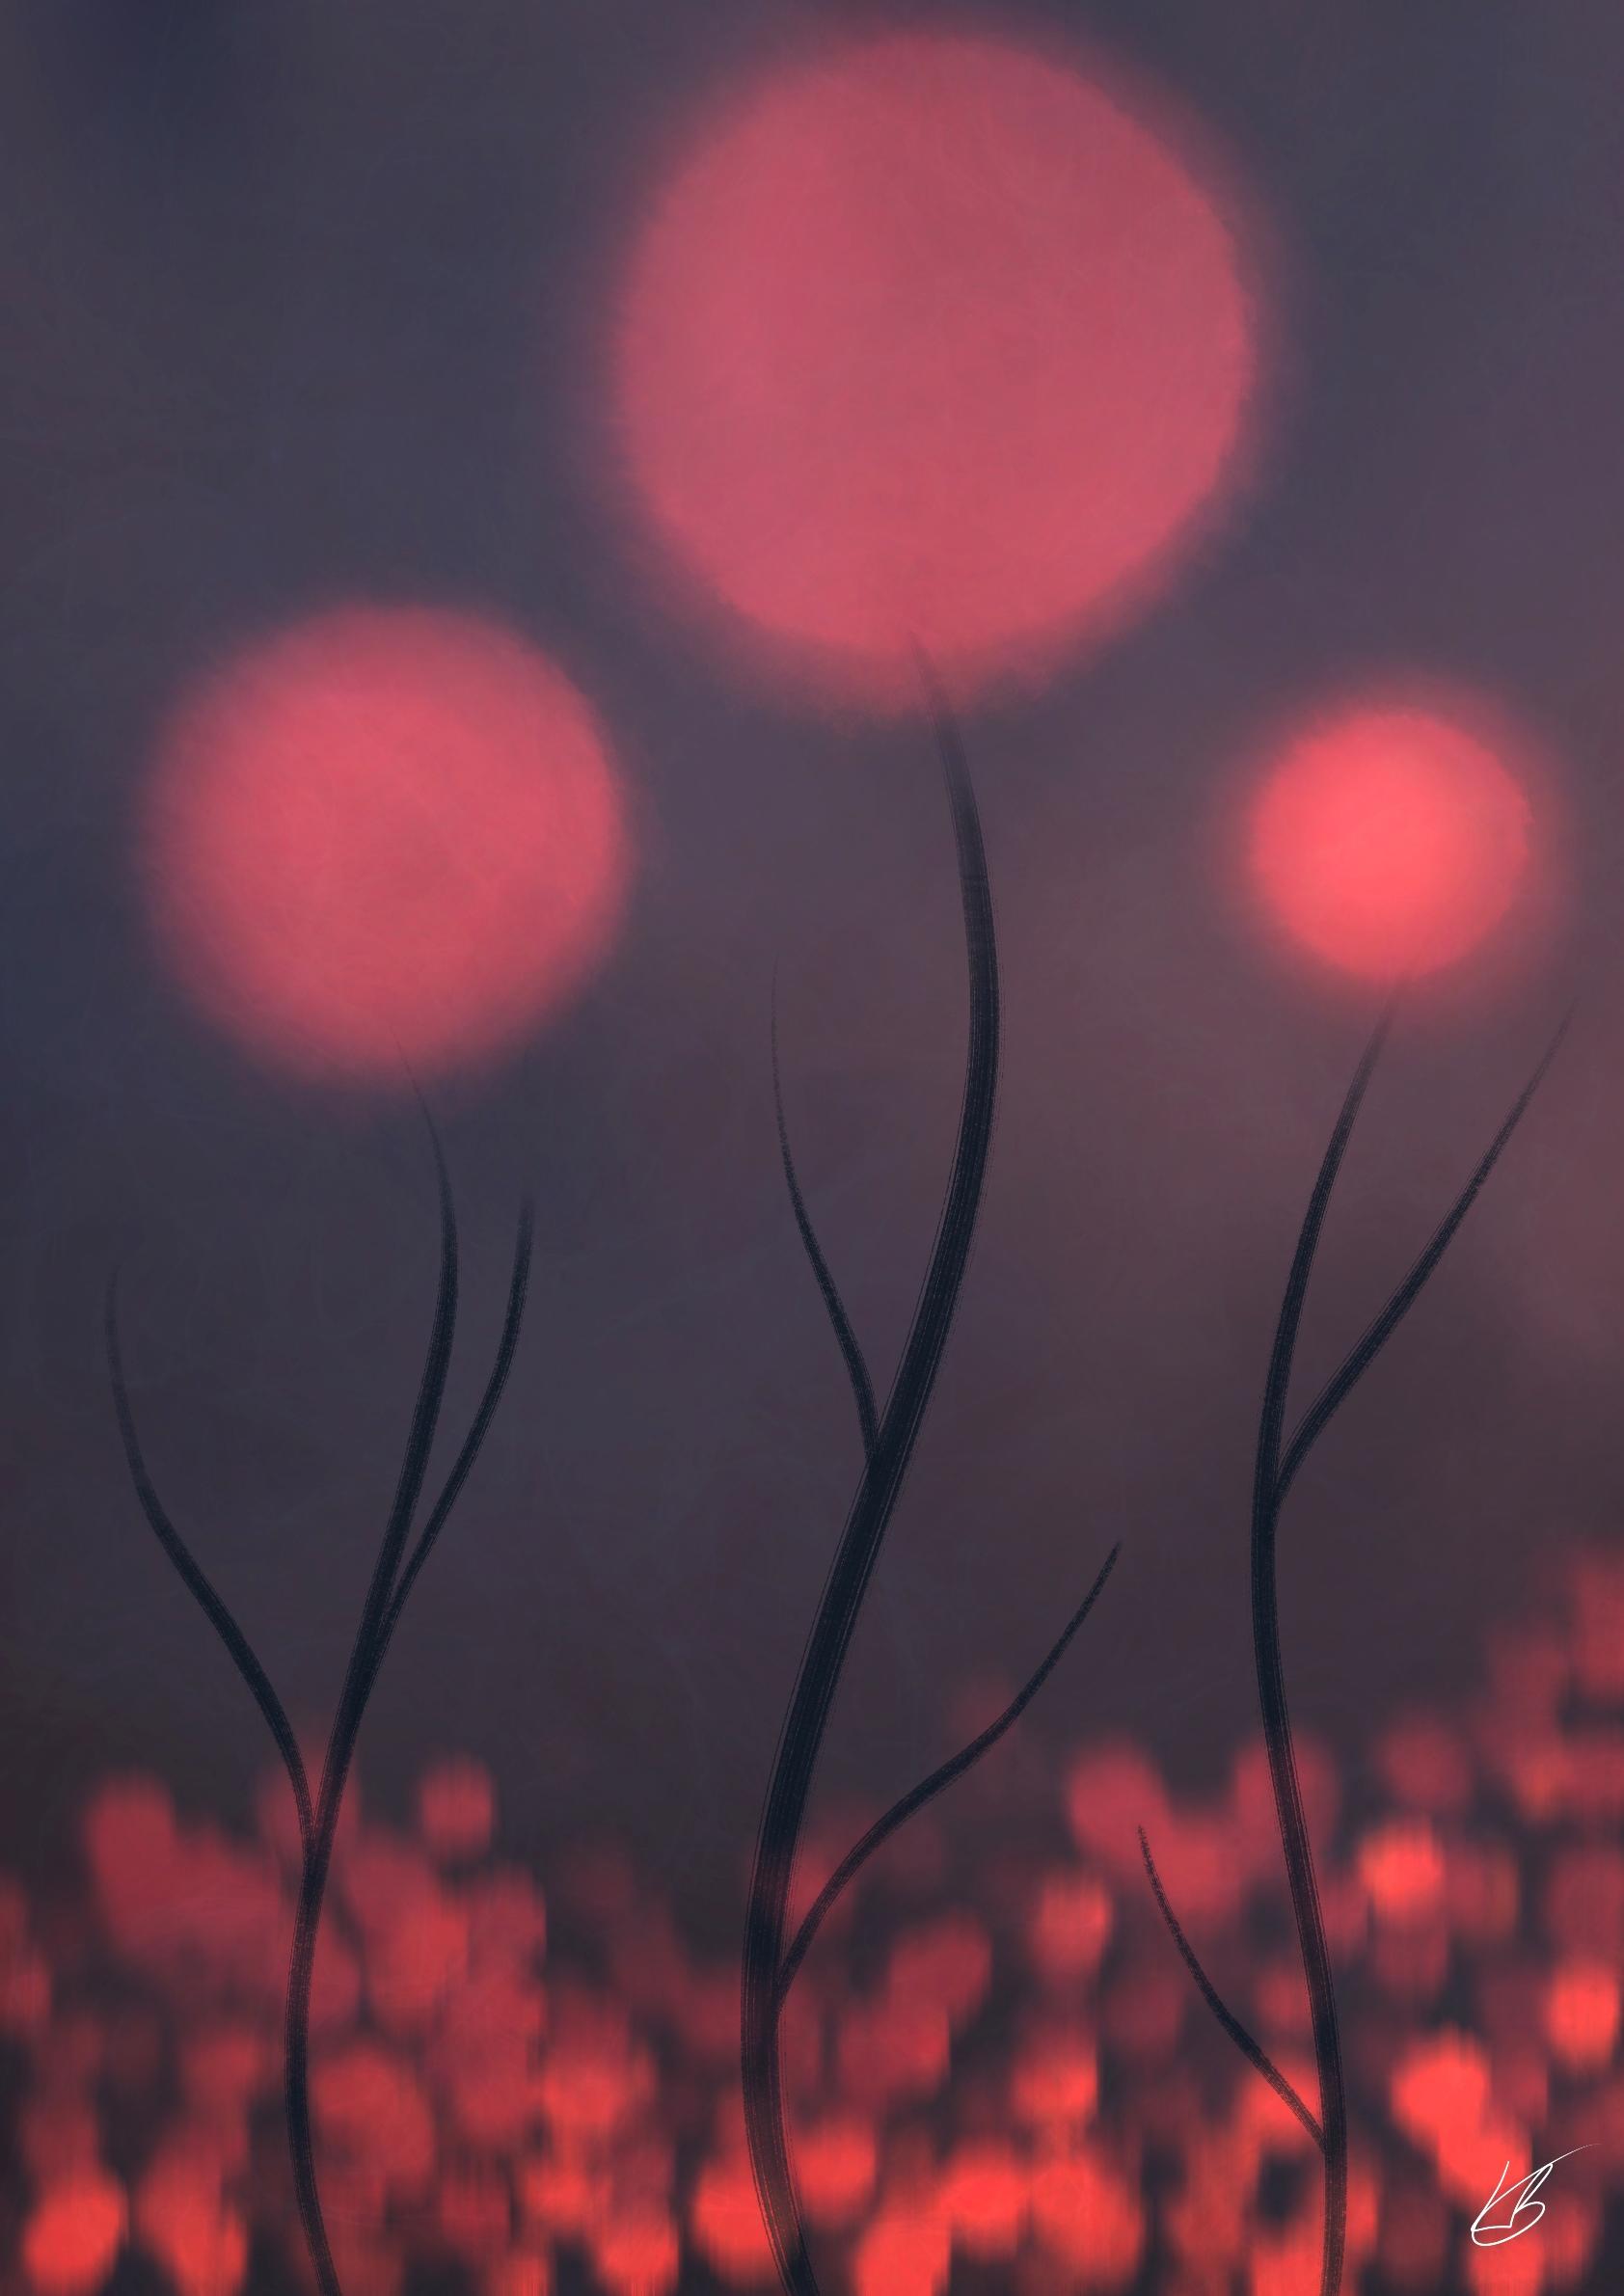 An abstract digital painting by Lily Bourne titled Ember Flowers. A red themed artwork with red ball flowers shown at dusk.